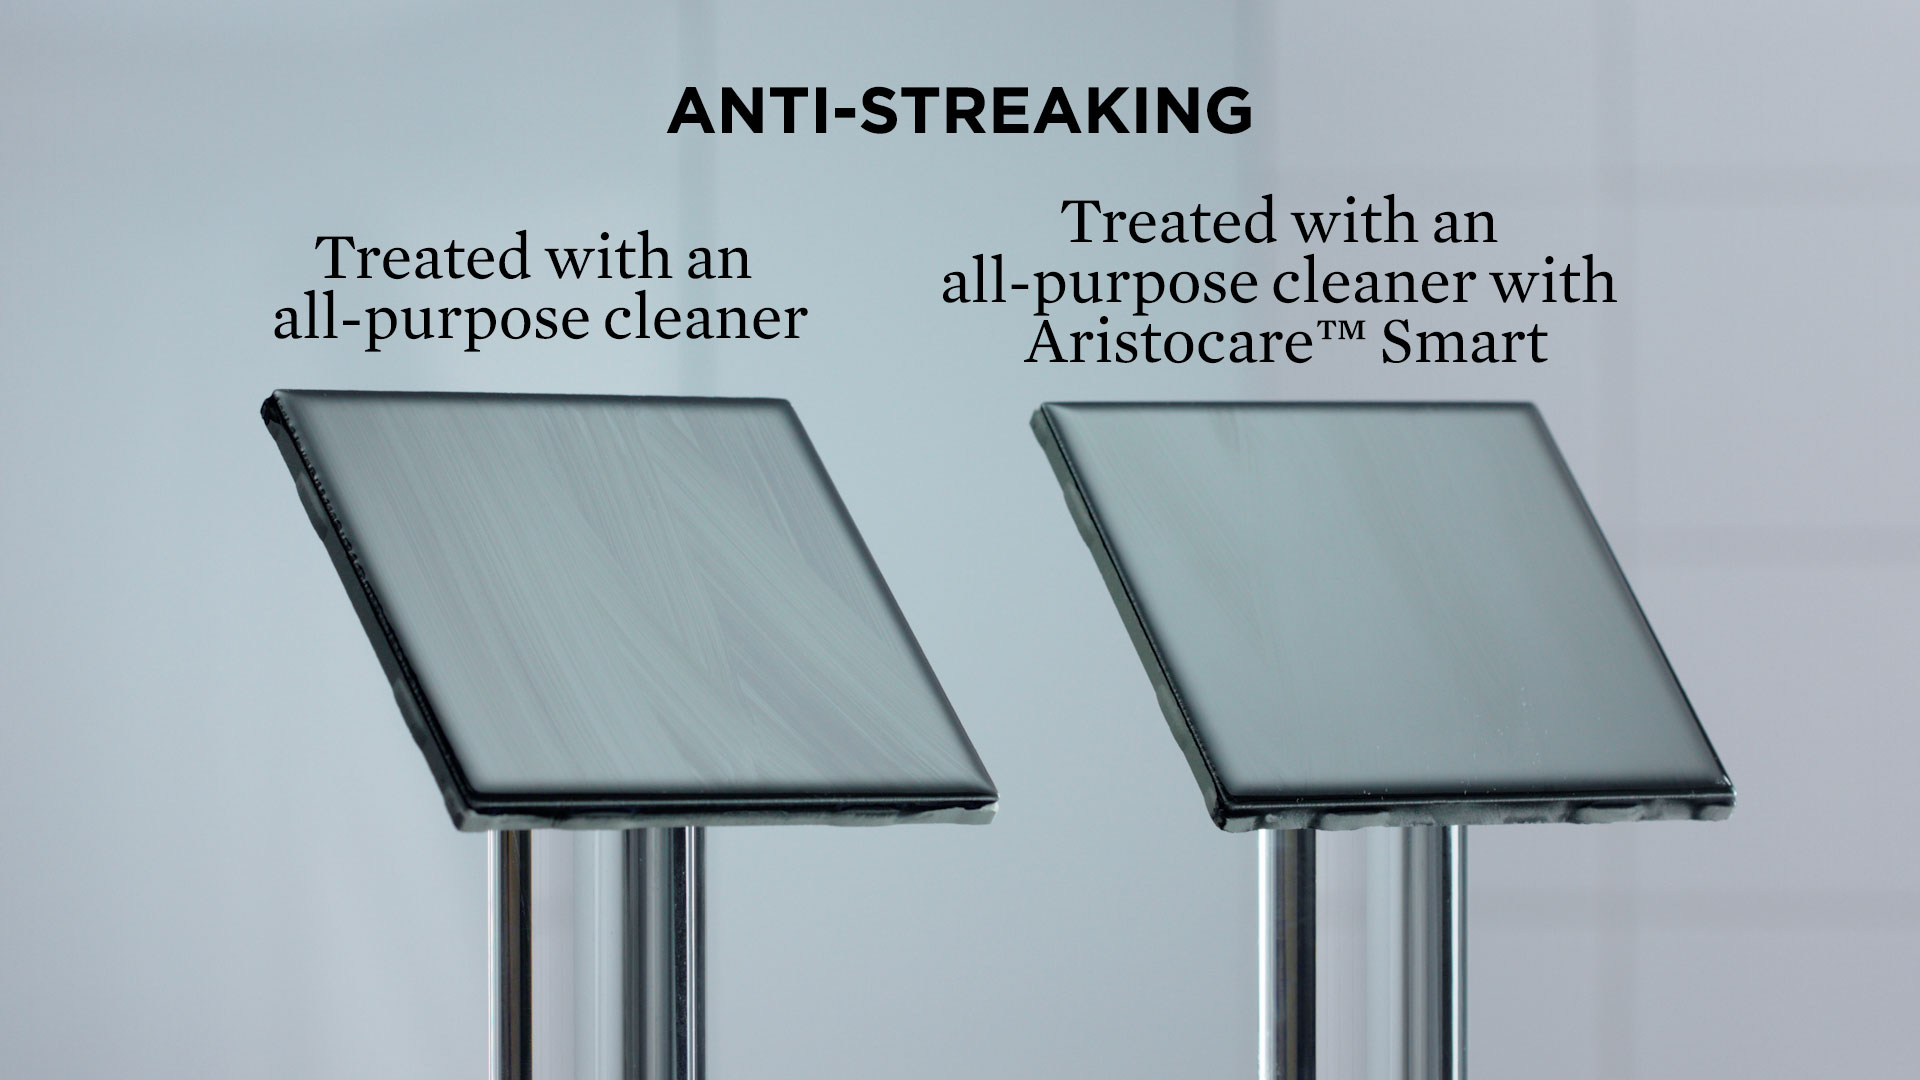 Aristocare Smart prevents streaking on hard surfaces